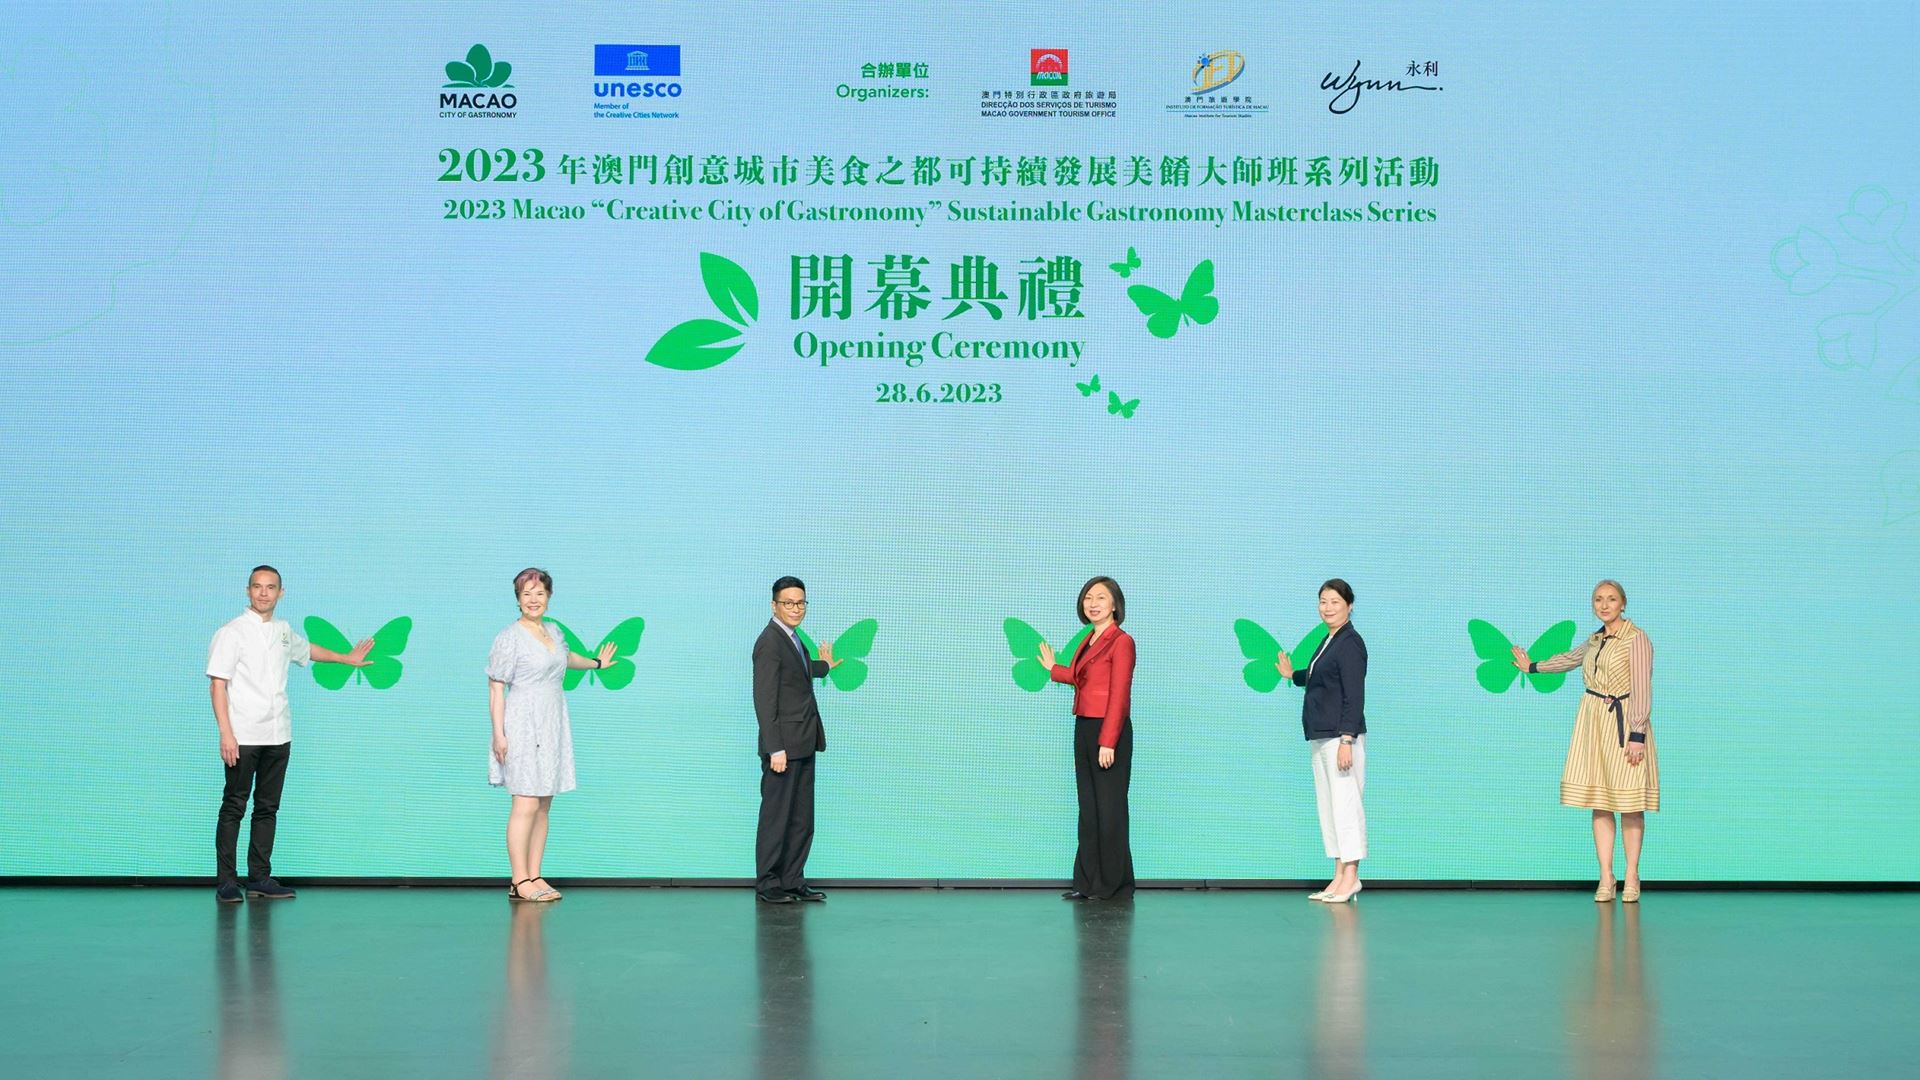 The opening ceremony of the "2023 Macao • Creative City of Gastronomy" Sustainable Gastronomy Masterclass Series...